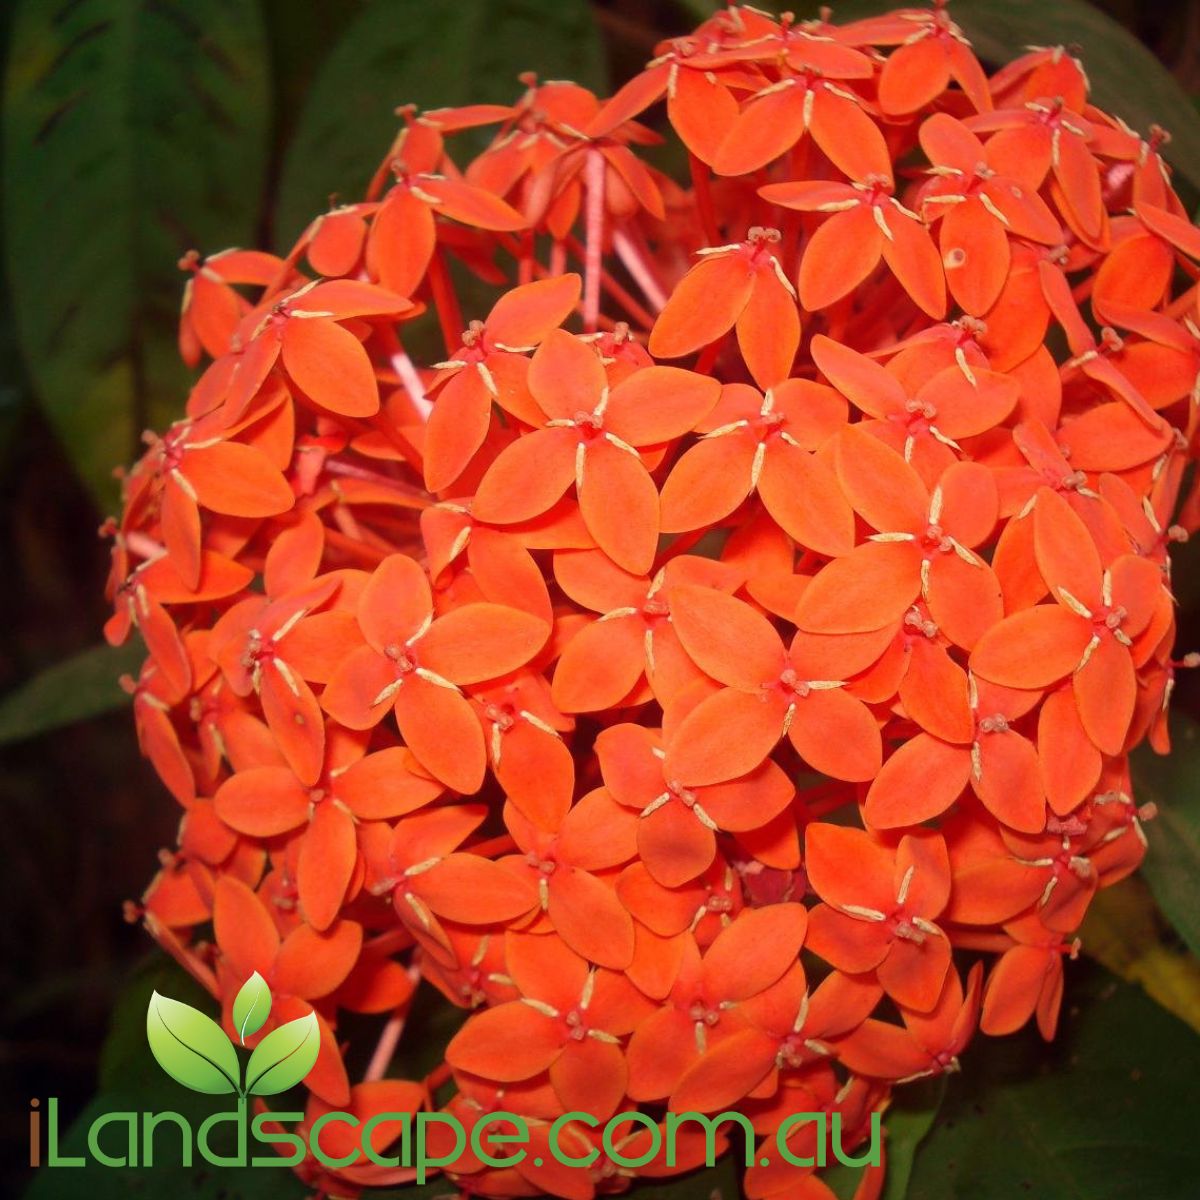 Ixora Compacta Red produces masses of beautiful red coloured flowers in heads that fade to orangish. An evergreen shrub that grows to approx. 1.0m high  Feed seasonally and prune regular to keep a nice shape with lots of new growth 